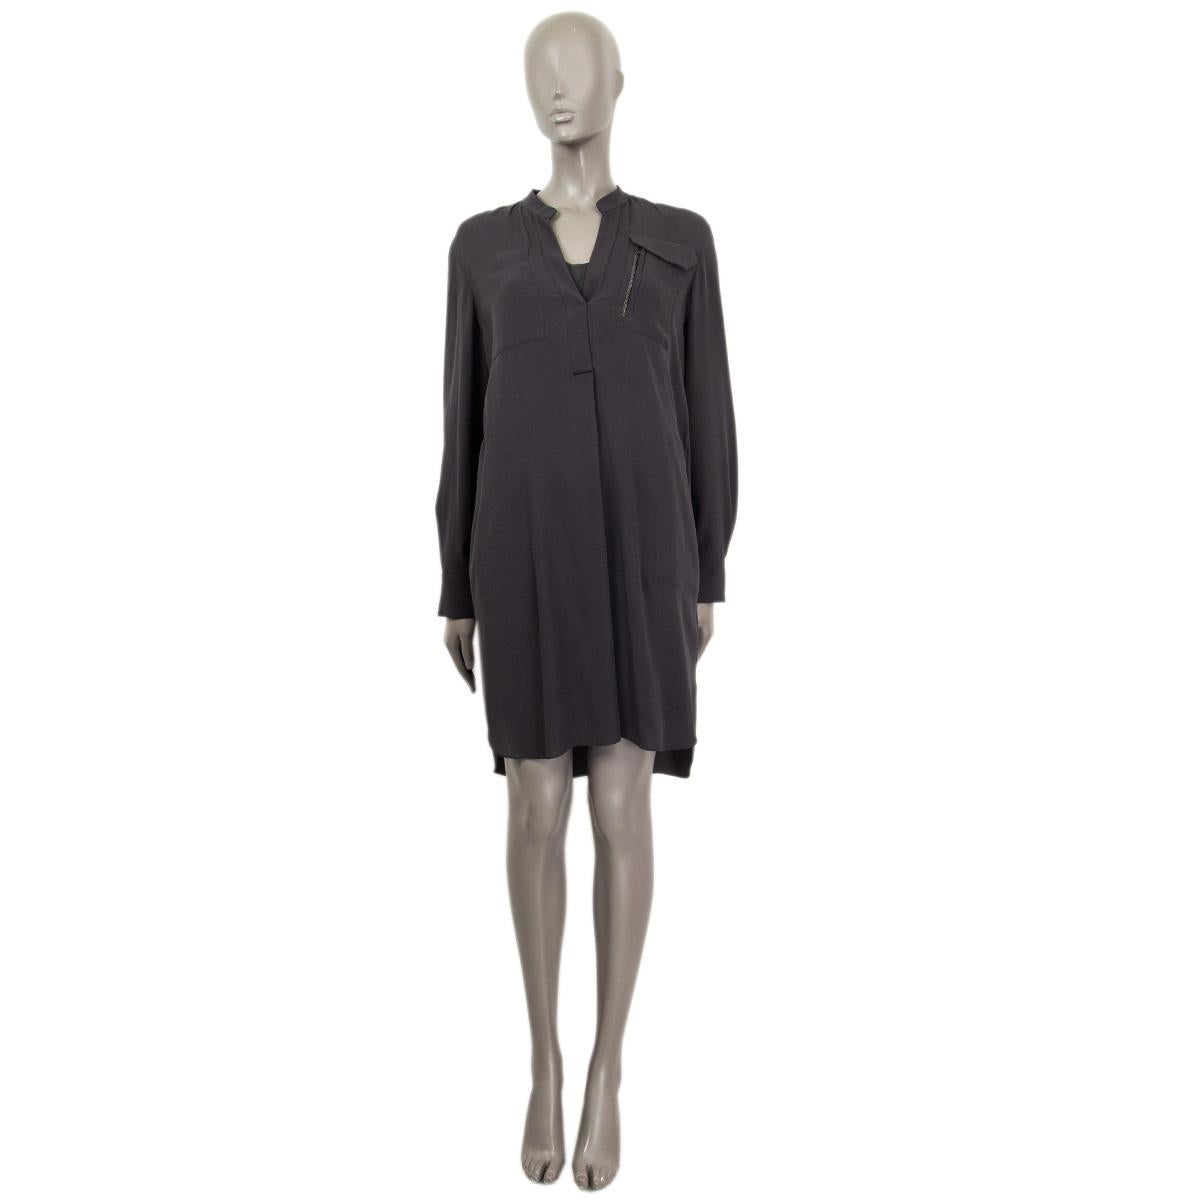 100% authentic Brunello Cucinelli long sleeve draped shirt dress in anthracite silk (100%) with an embroidered V-neck . Embellished with signature Cucinelli beads. With buttoned cuffs, one zipper pocket and three slit pockets on the front. Comes